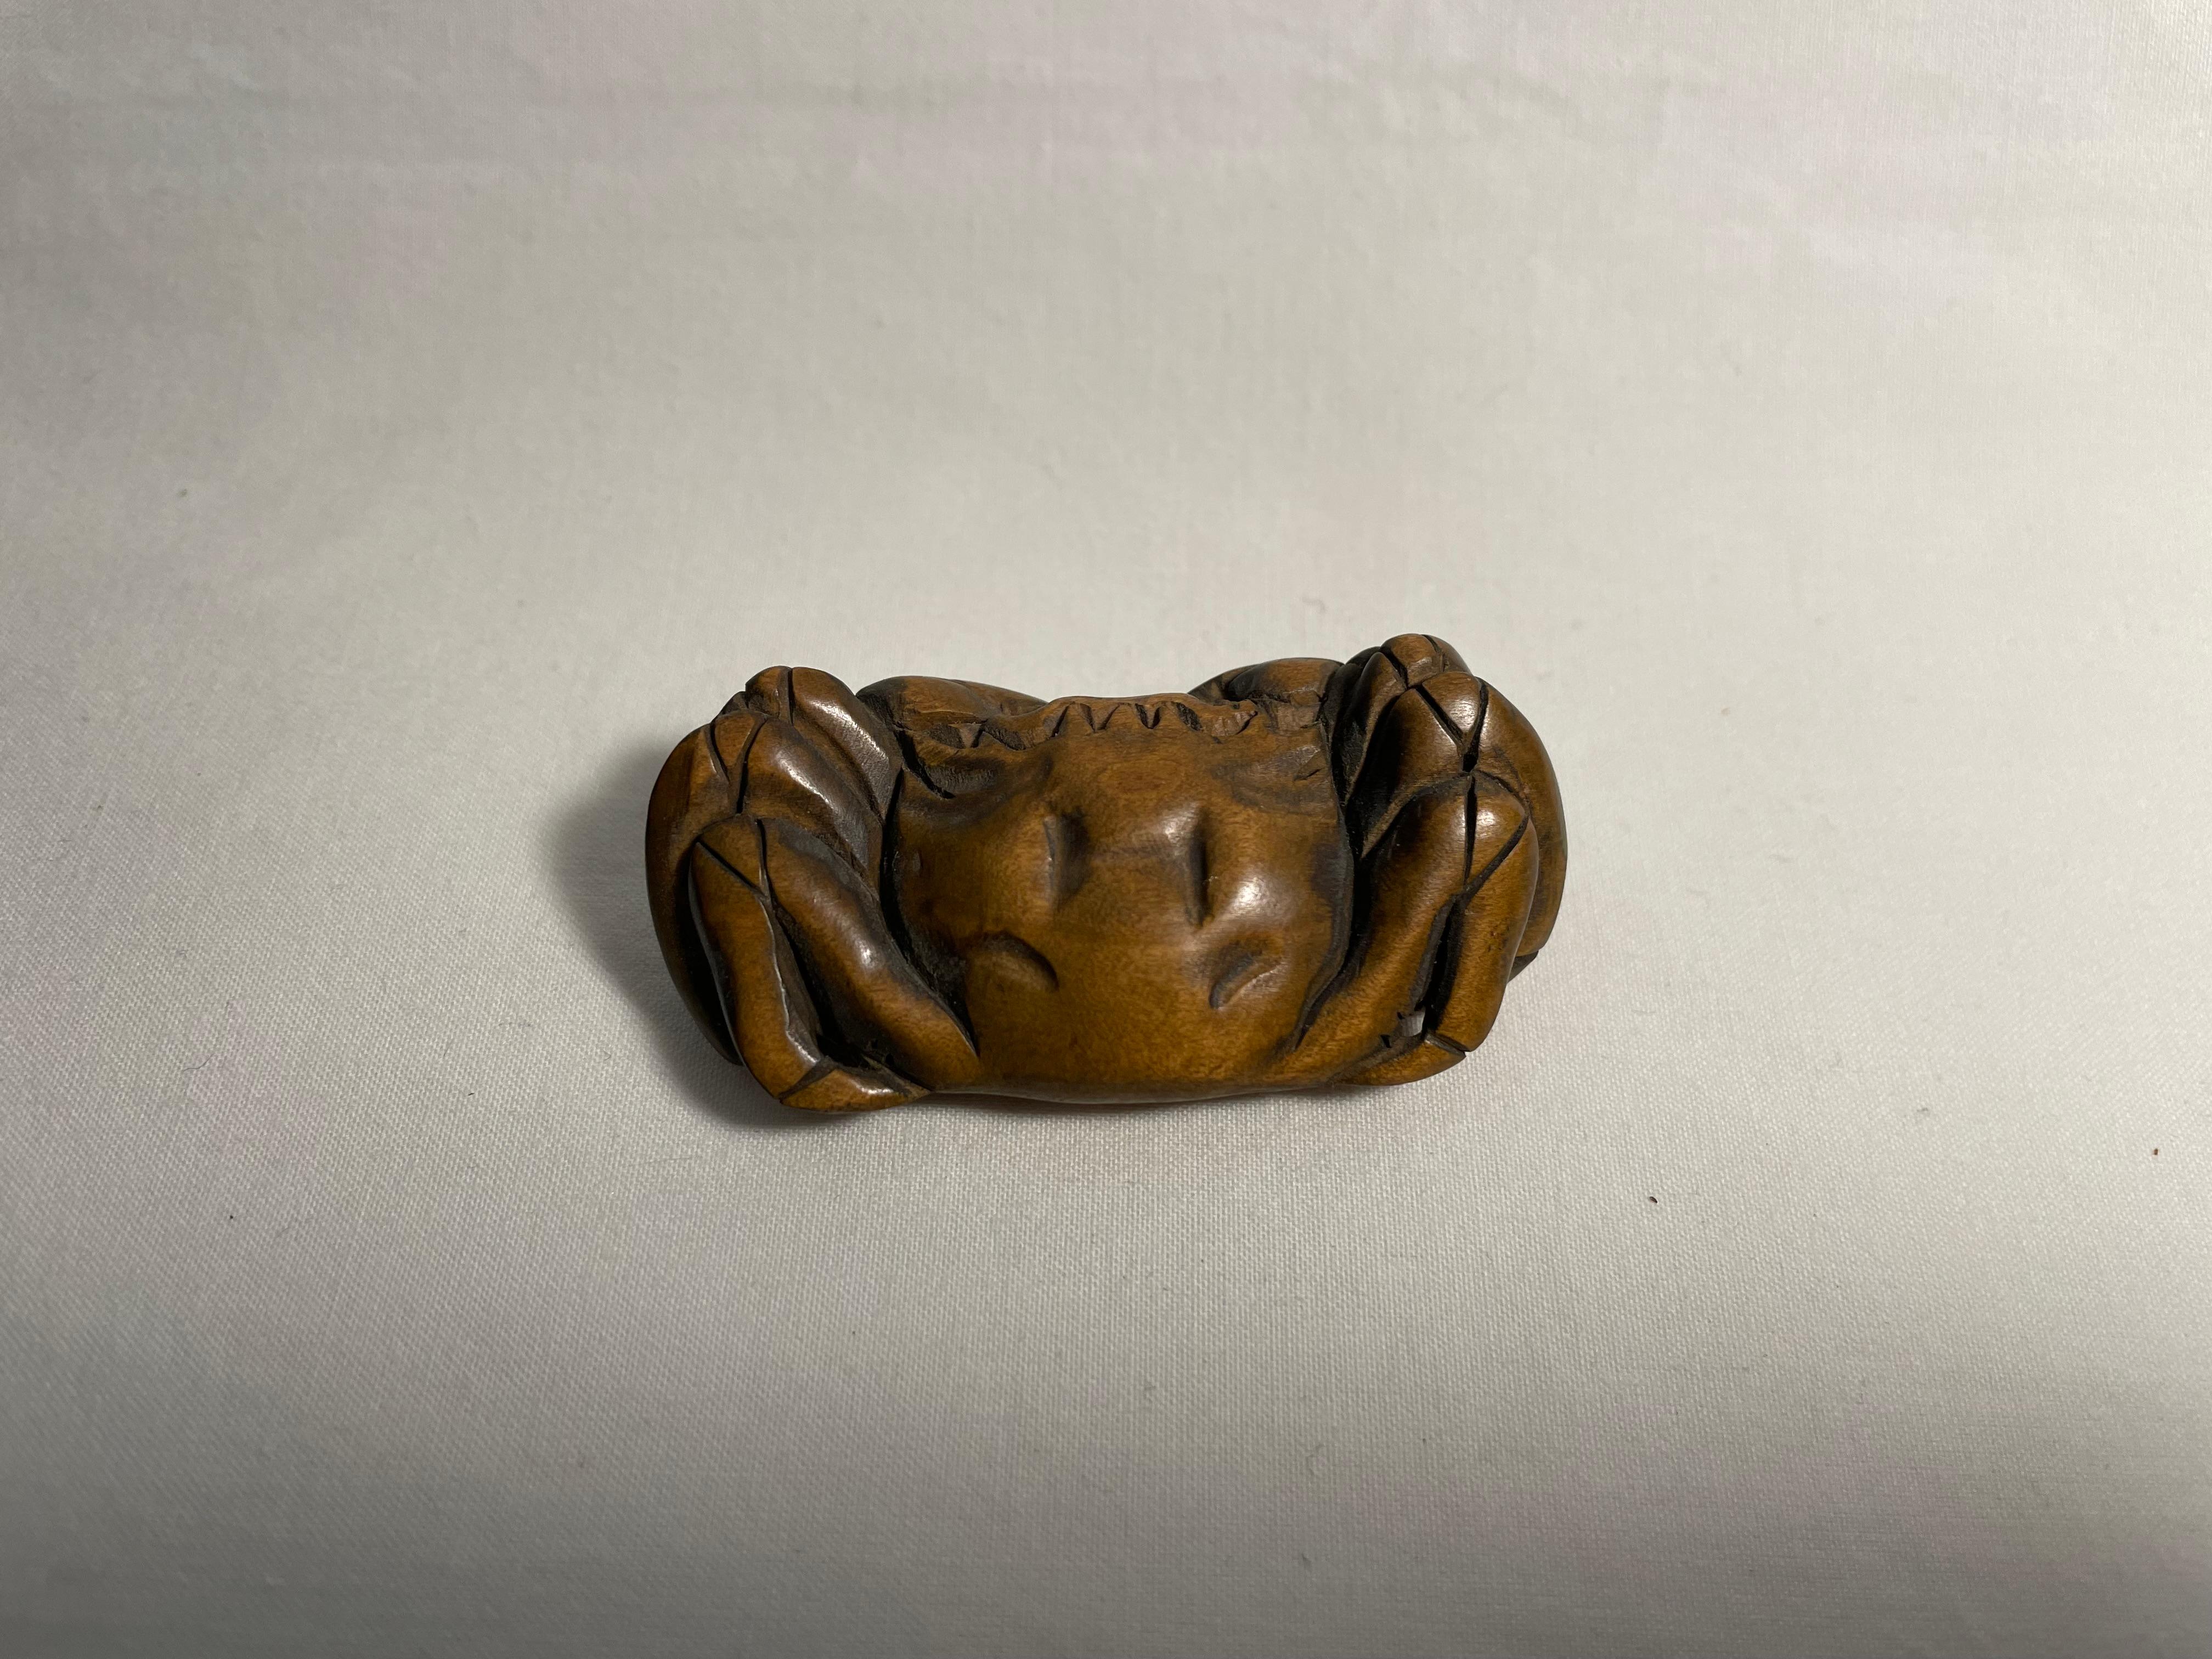 This is an antique netsuke made in Japan around meiji period 1900s.
This netsuke was made by a netsuke artist 'Gyokuseki' (you can see his signature on the bottom of this crab.)

Netsuke is a miniature sculpture, originating in 17th century